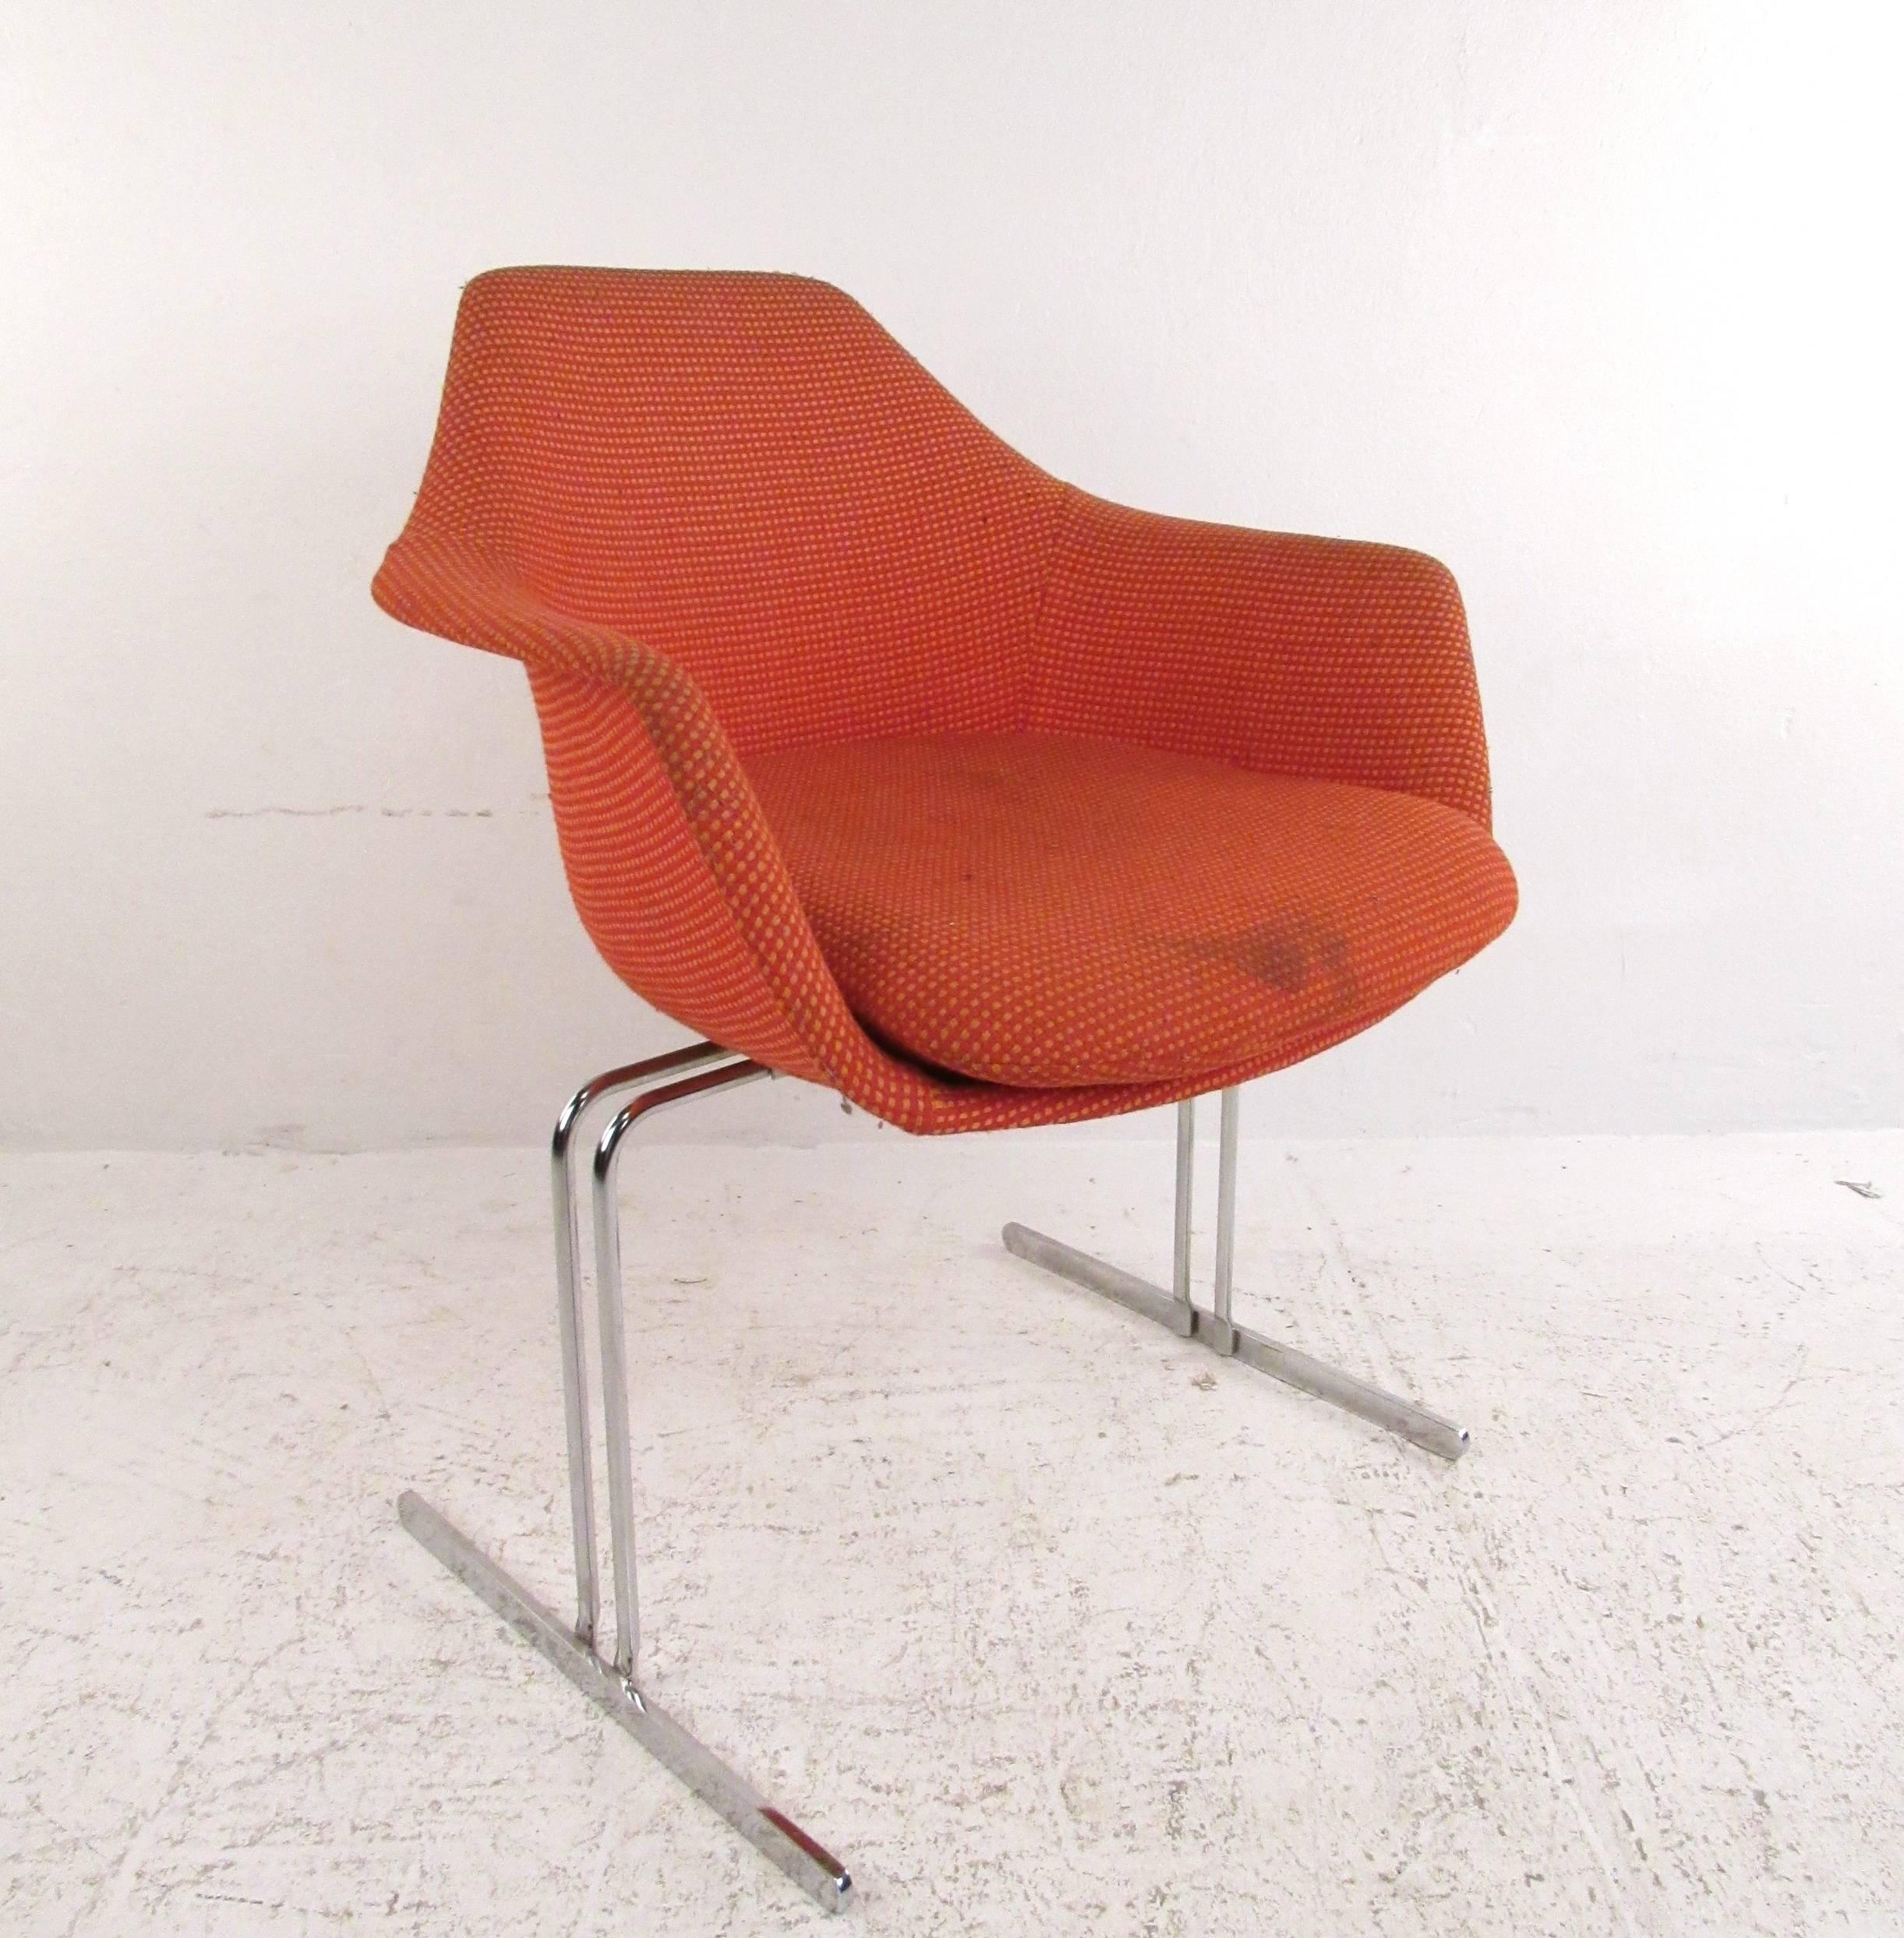 This set of Mid-Century Modern Eero Saarinen style conference chairs features a unique vintage style similar to the Womb chair as sold by Knoll. The unique molded shell design with upholstered frame and t-style chrome base makes for a visually